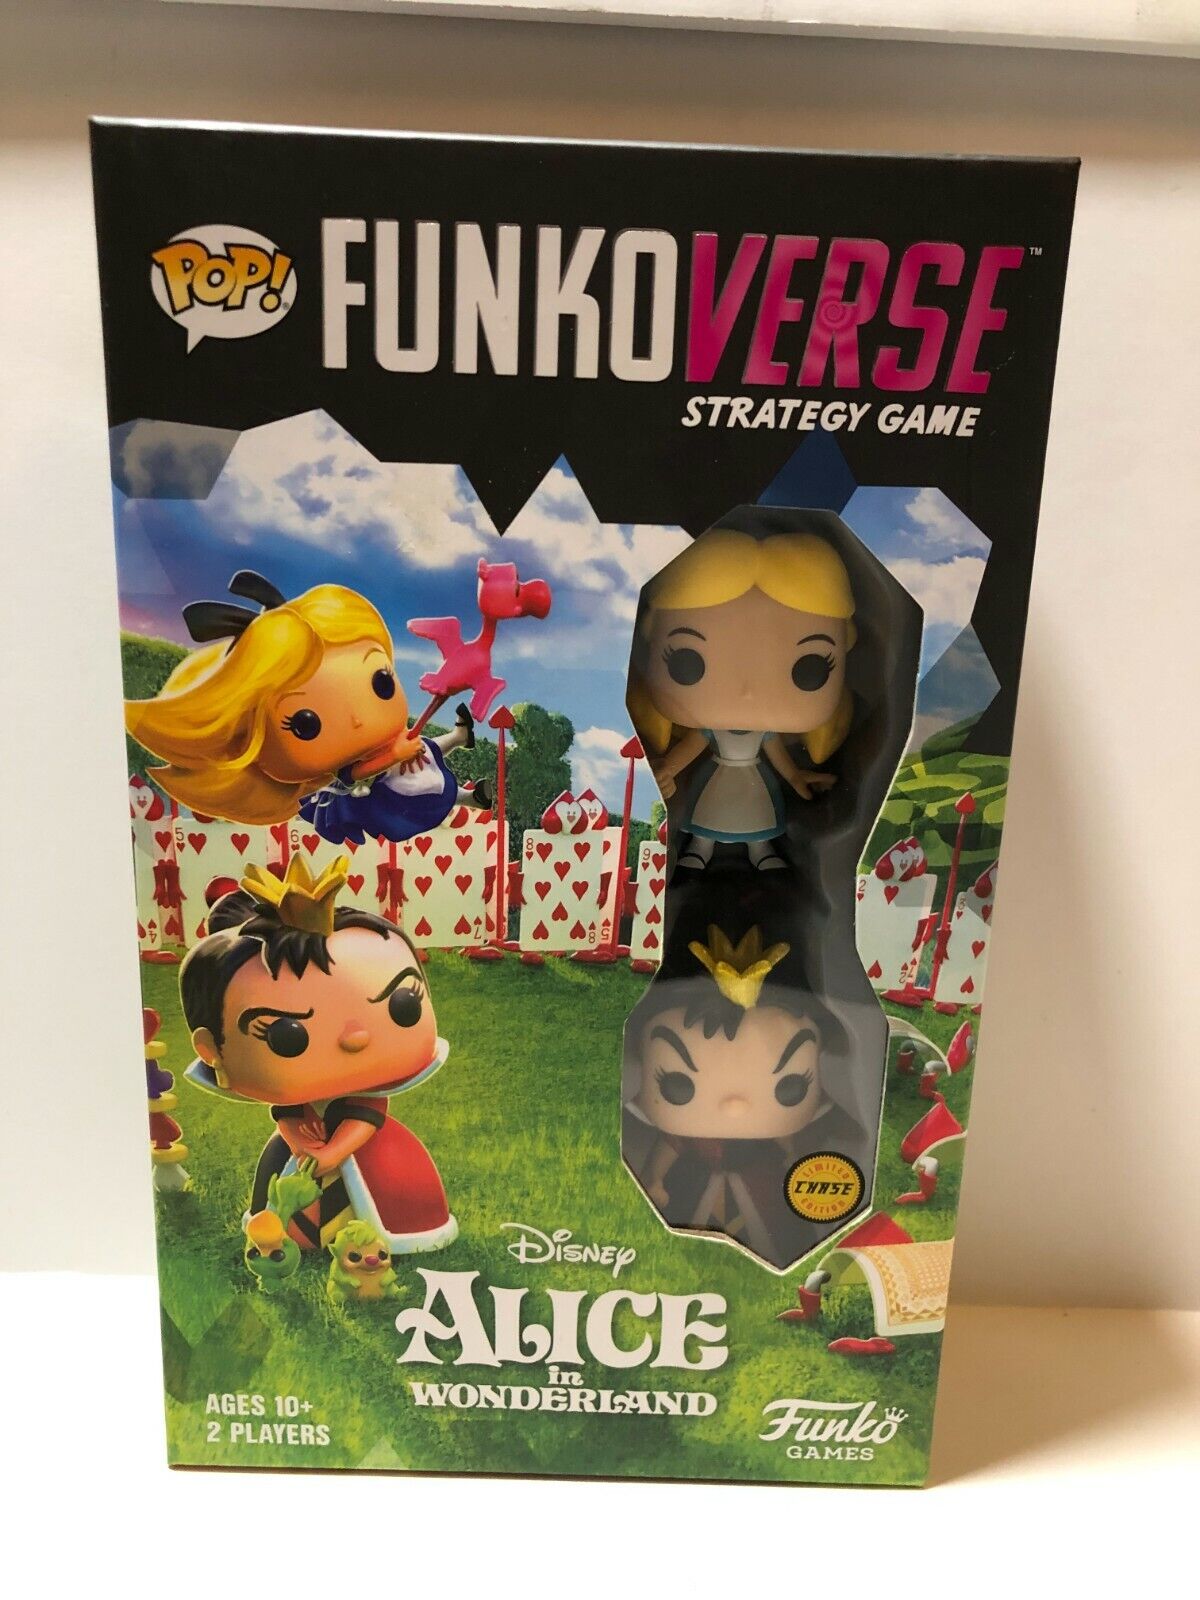 FunkoVerse Strategy Game Disney Alice In Wonderland Chase Edition Ages 10+  | eBay